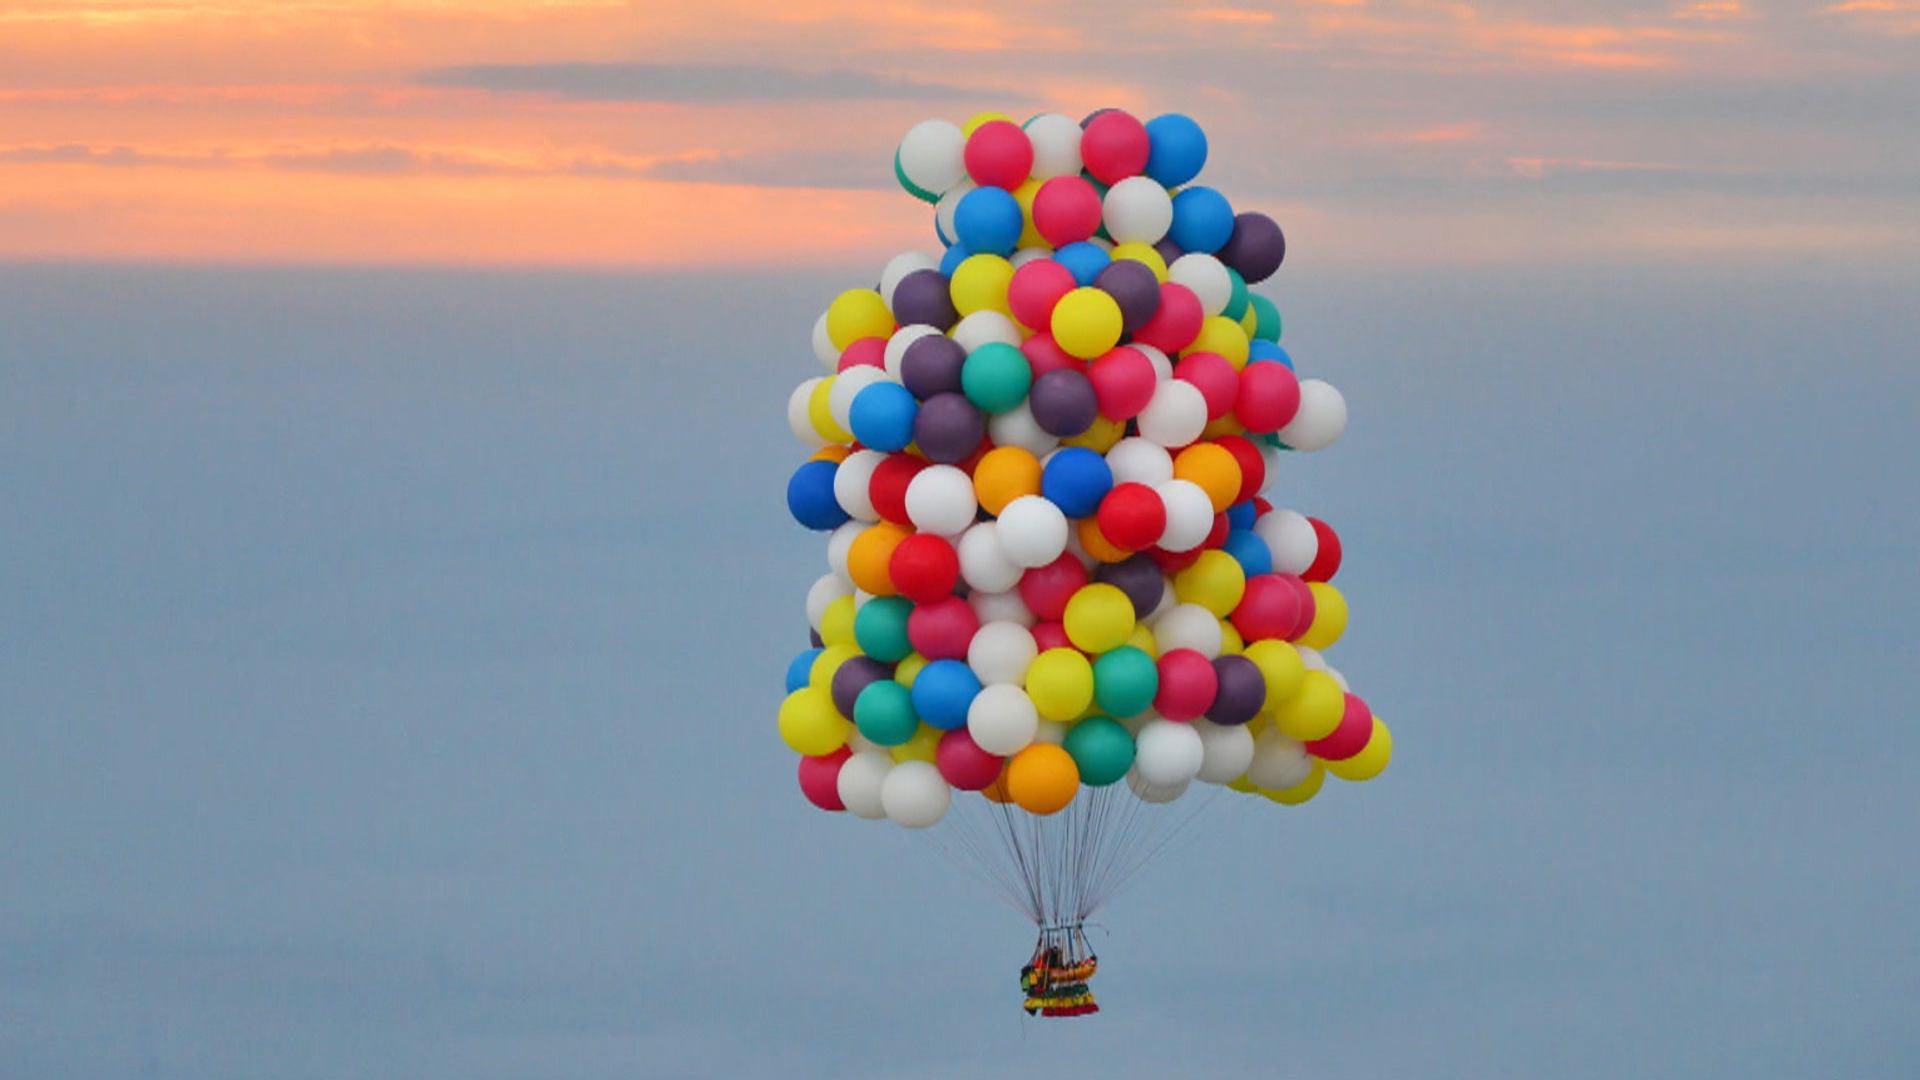 Up, up and away: Man tries flying with just balloons - NBC News